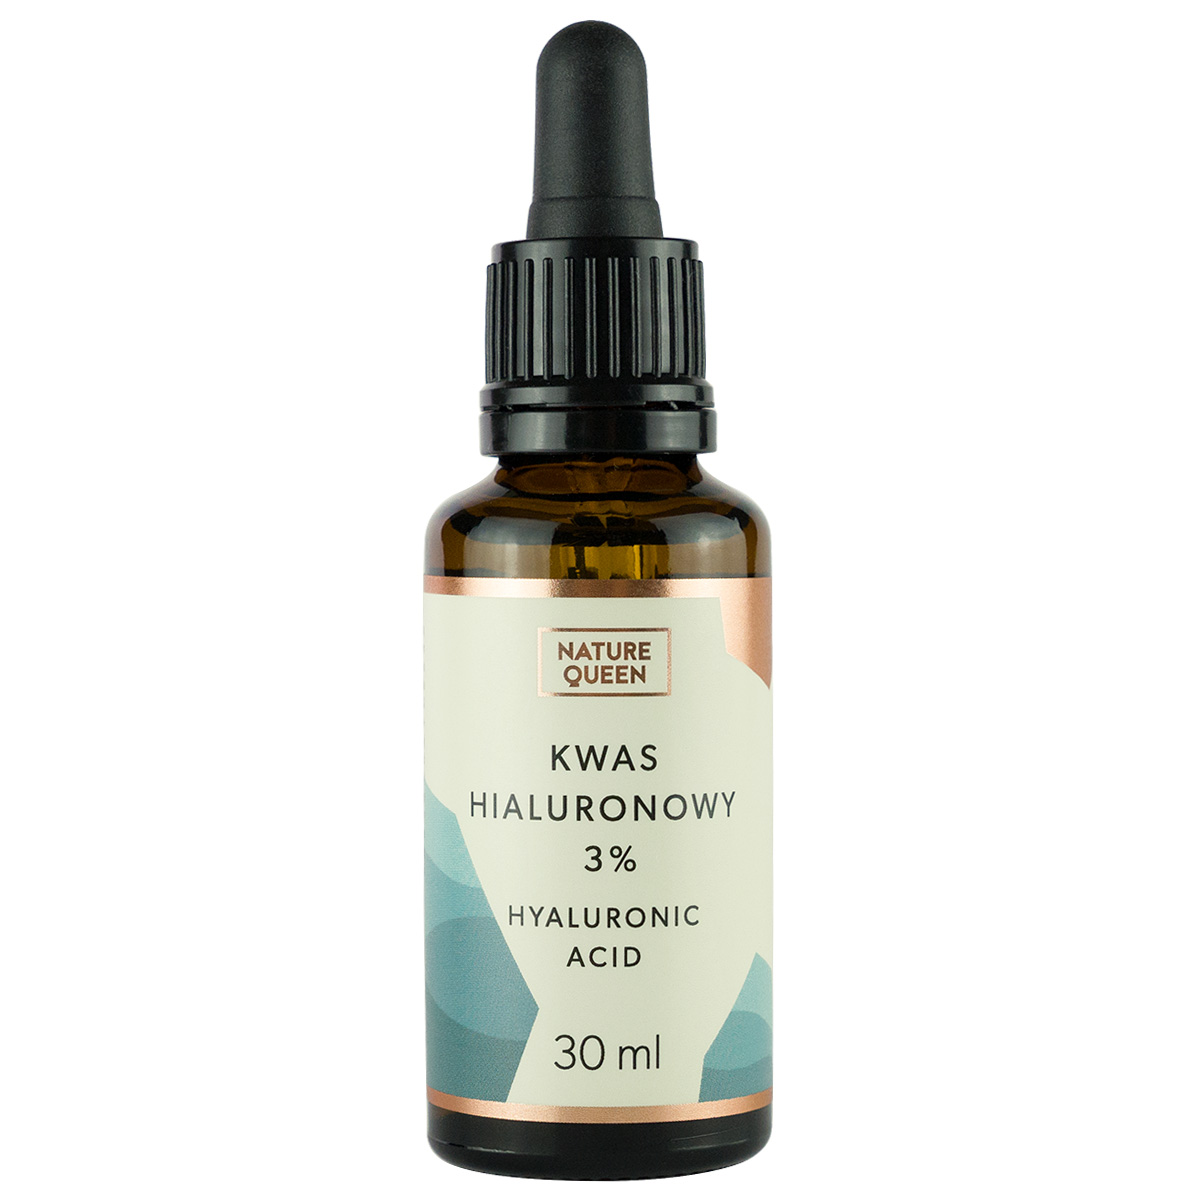 Nature Queen Kwas hialuronowy 3% 30ml